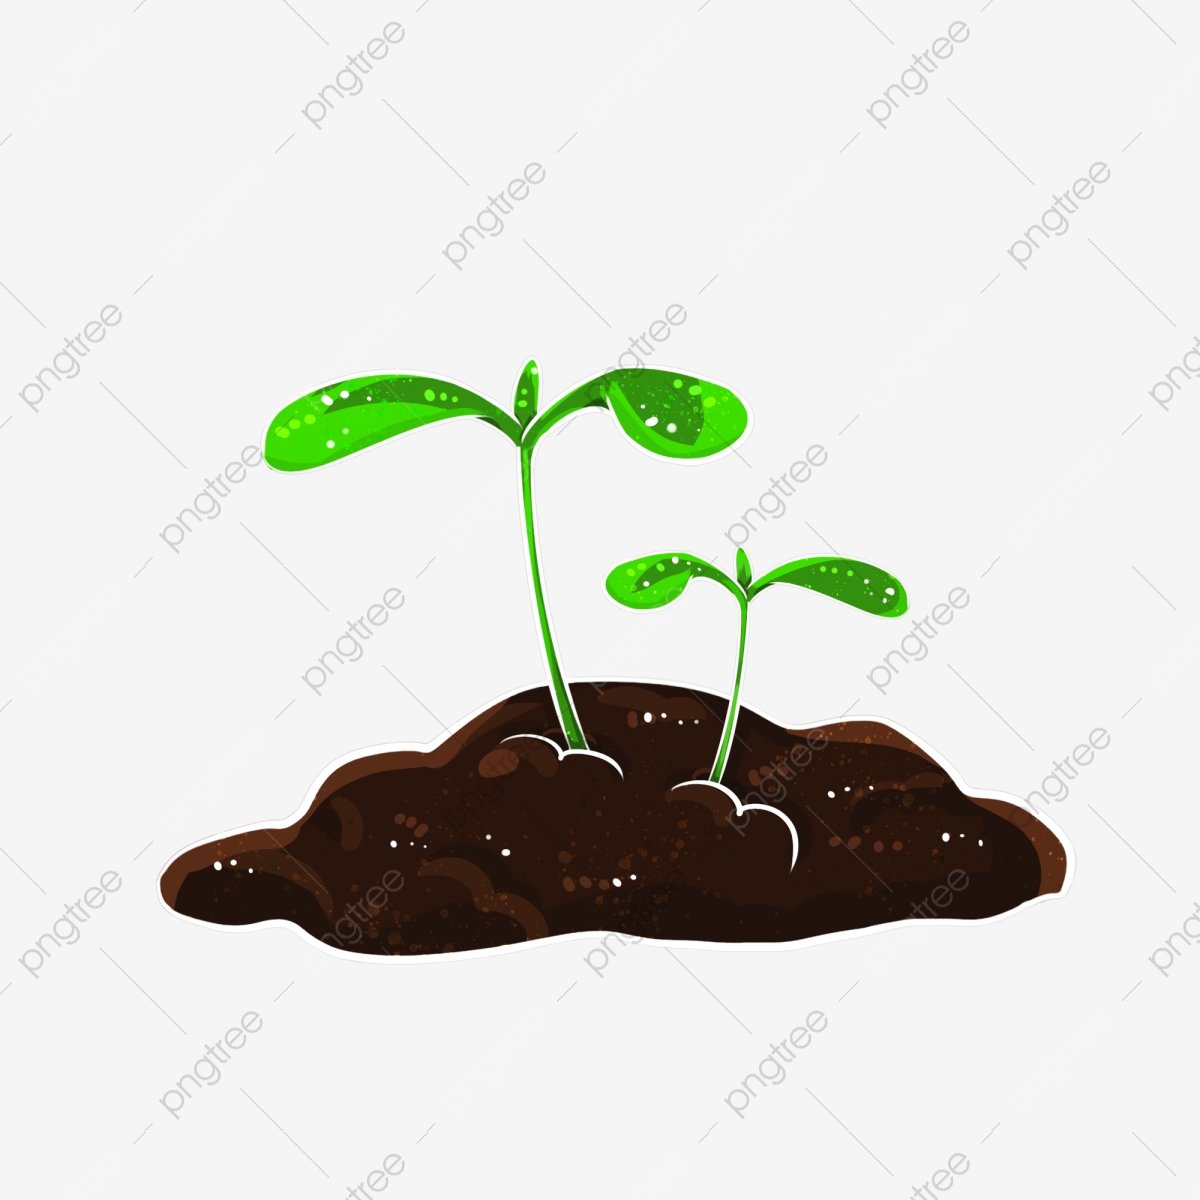 seedling clipart grass seed